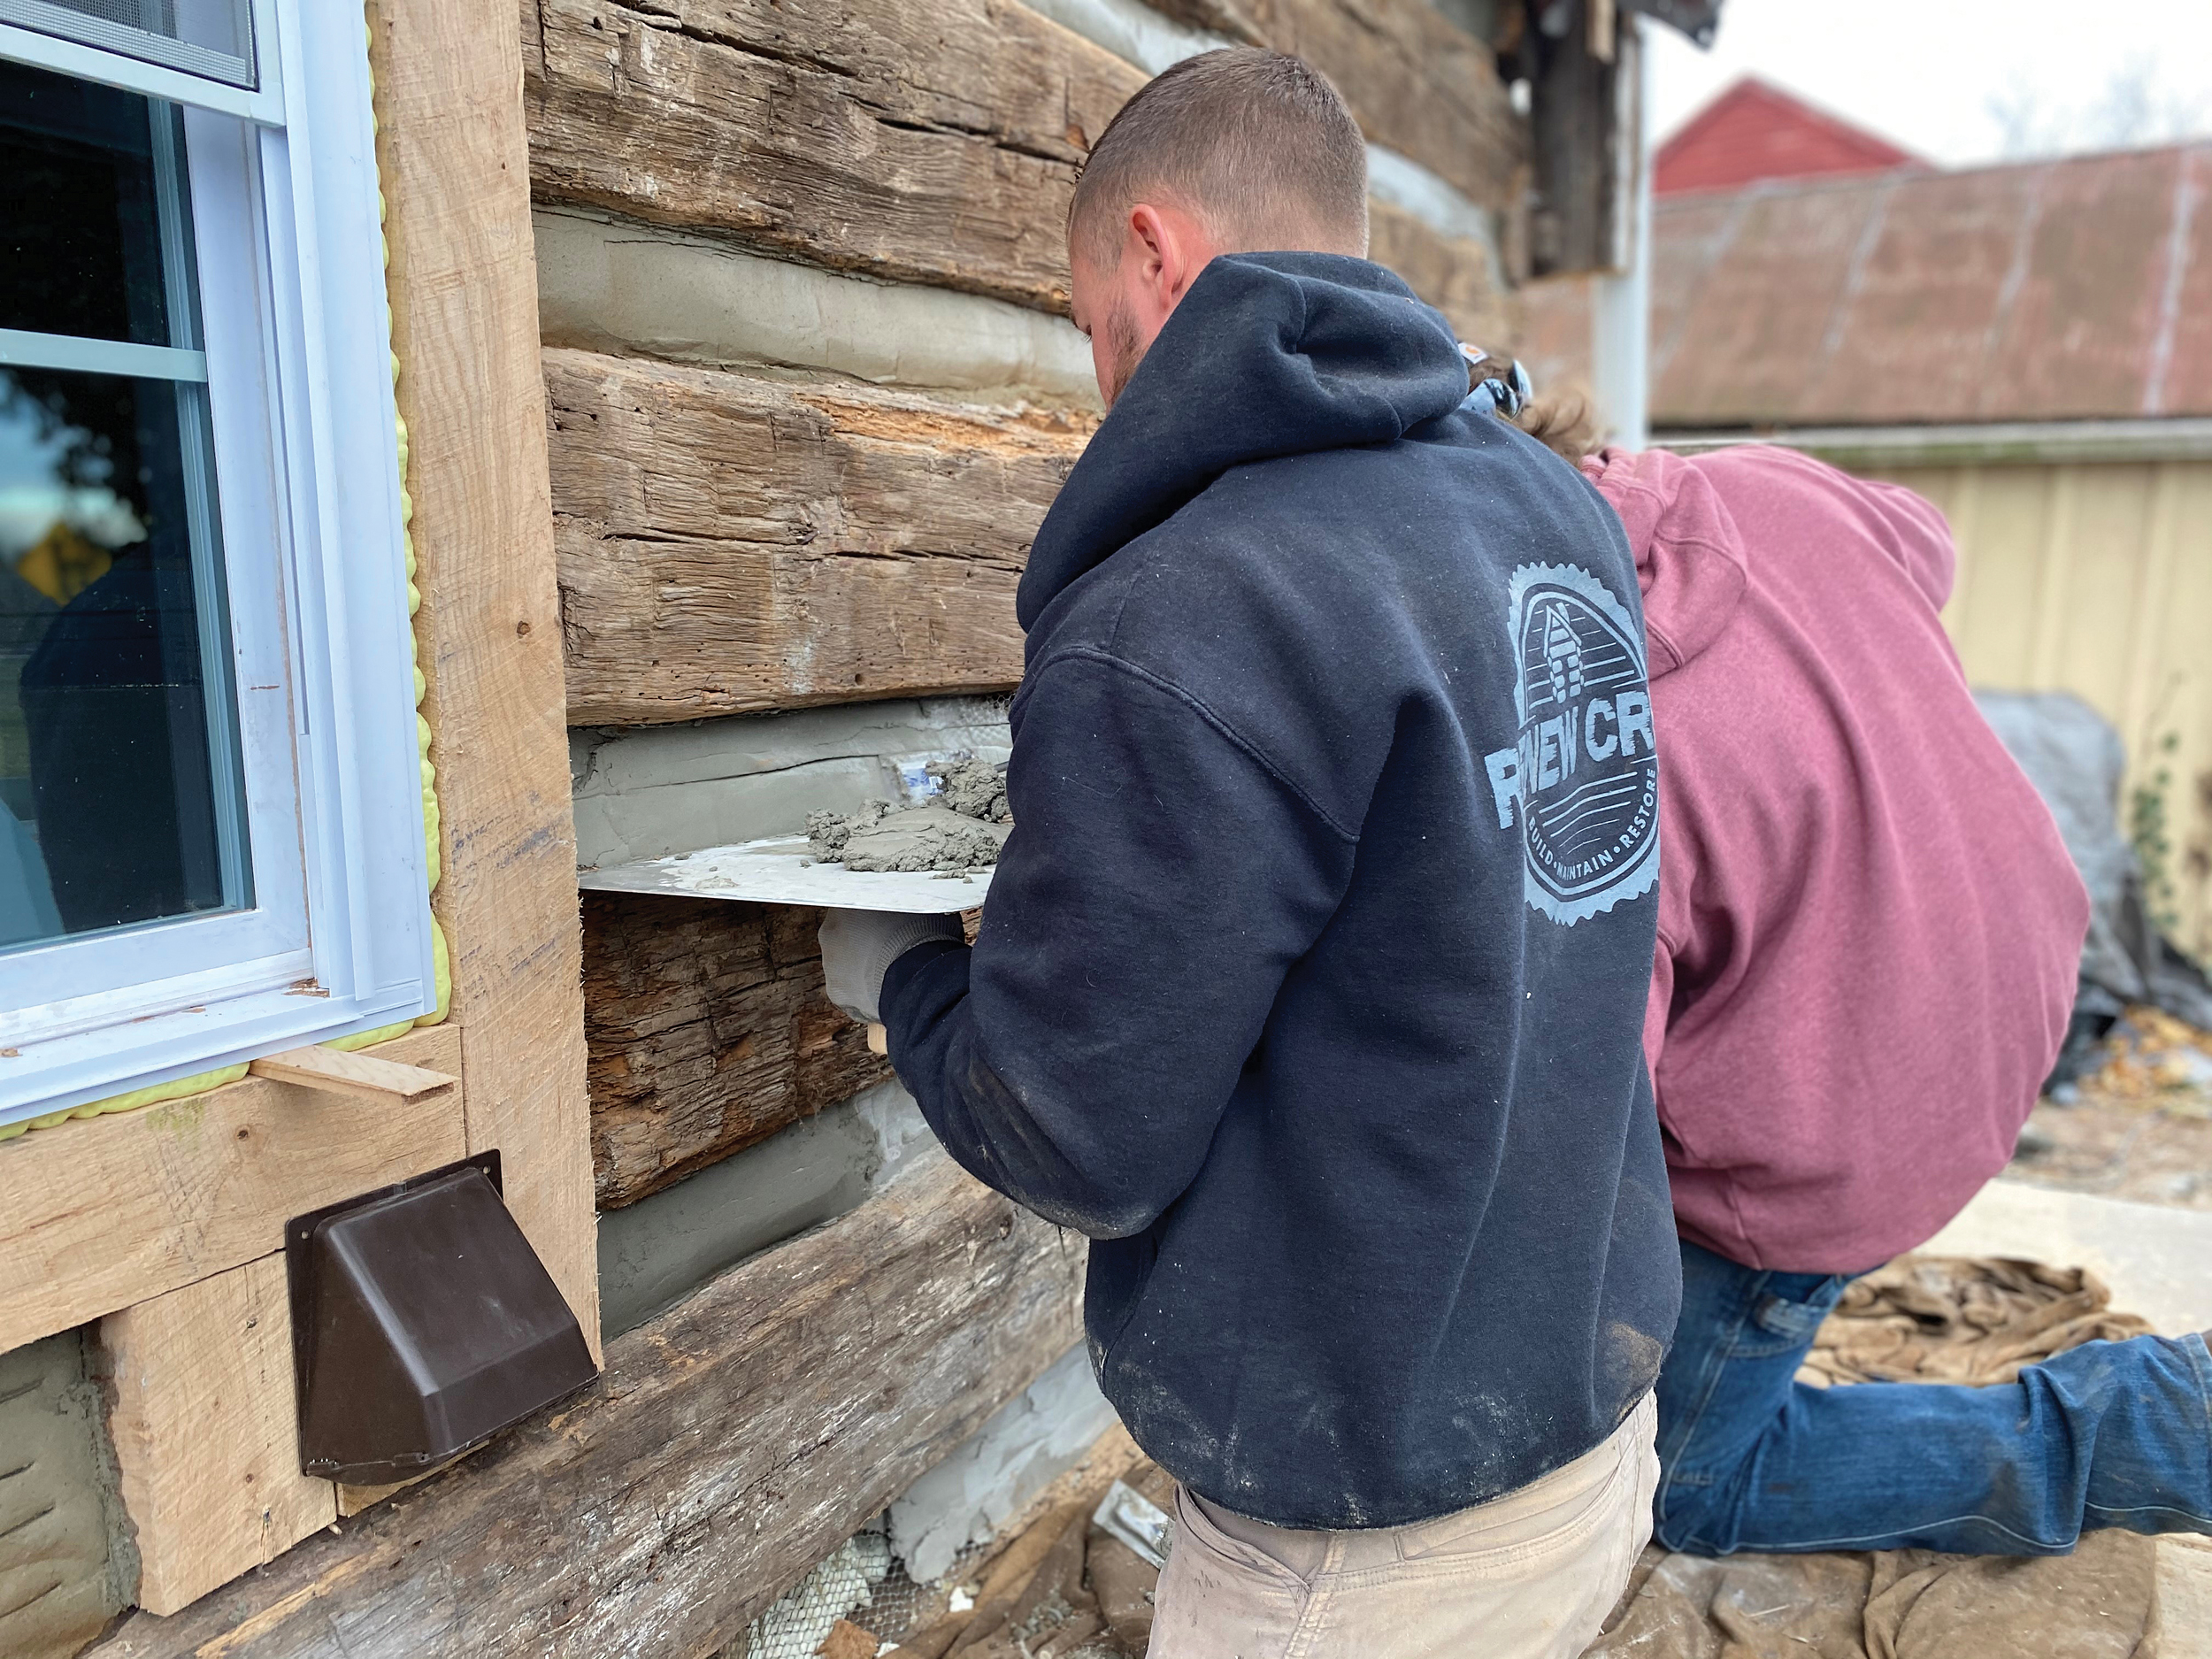 Crew members of Shippensburg-based Renew Services apply daubing to a log home in Gettysburg as part of a full restoration project.